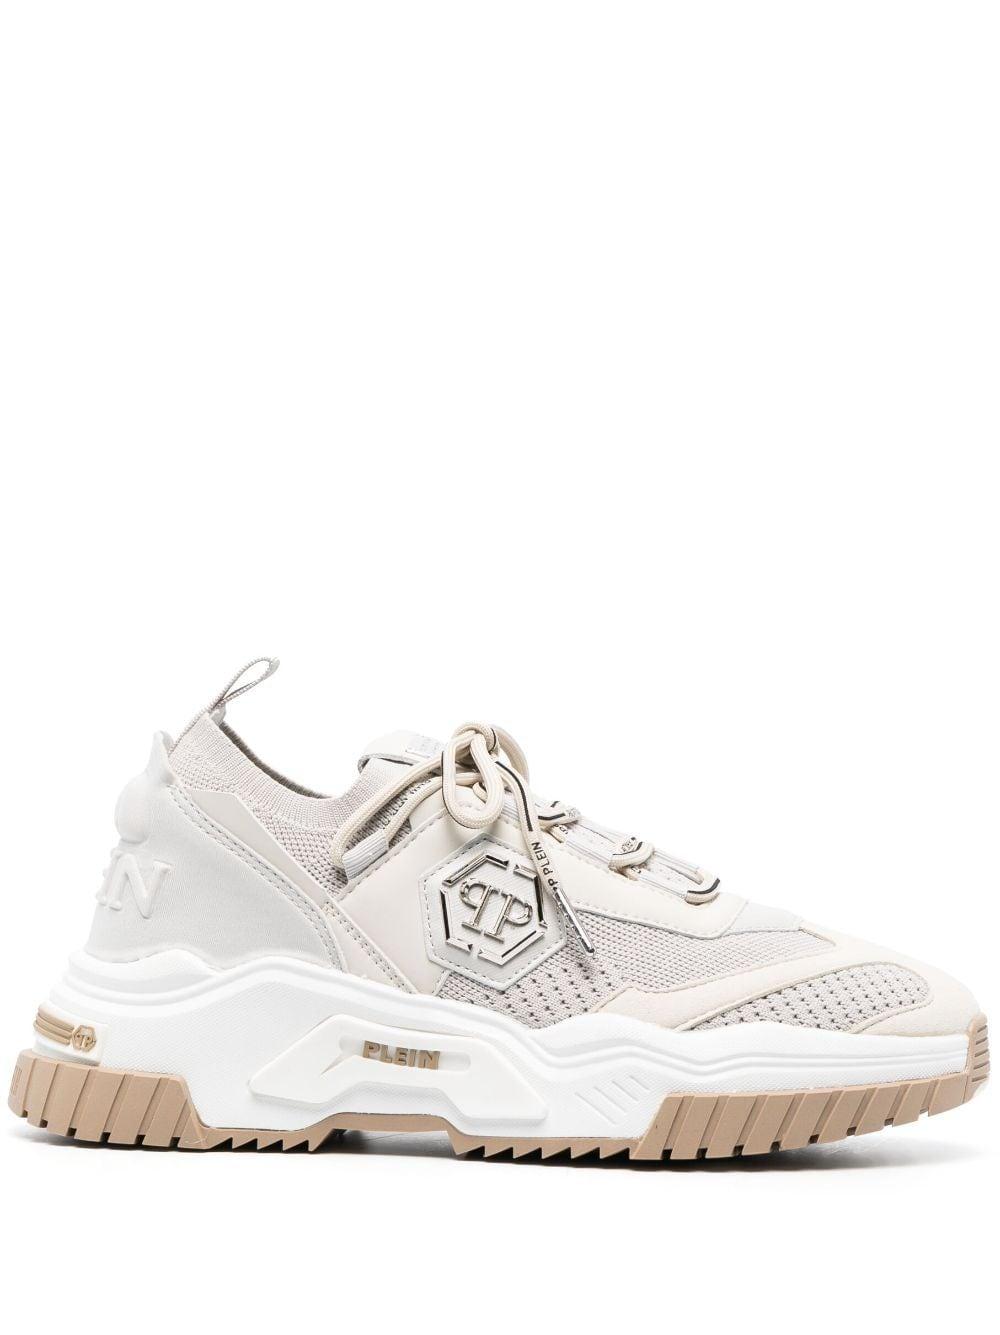 Philipp Plein Runner Hexagon Lace-up Sneakers in White Lyst